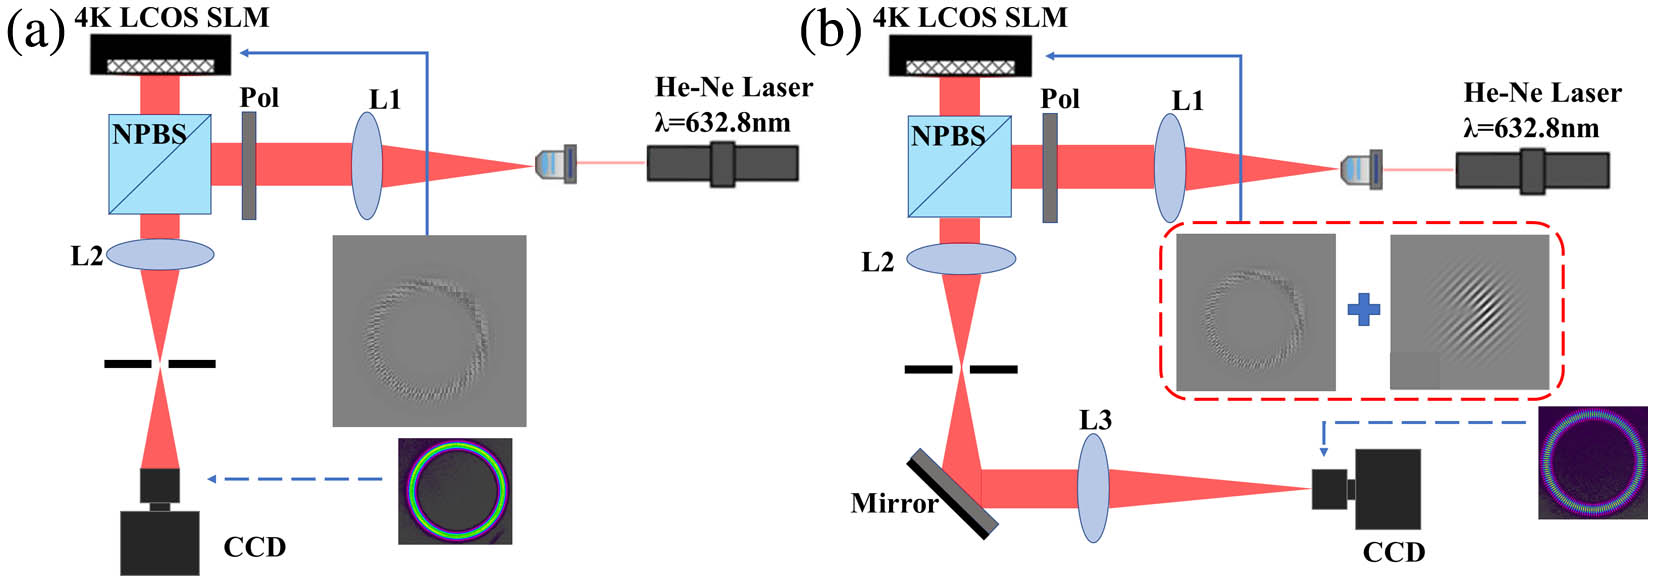 Experimental setup of a large topological charge LG beam generated by 4K SLM (L1, L2, L3, lens; Pol, polarization; SLM, phase-only spatial light modulators; NPBS, non-polarizing beam splitter): (a) generation of LG beams, (b) interference of LG beams and annular plane waves.